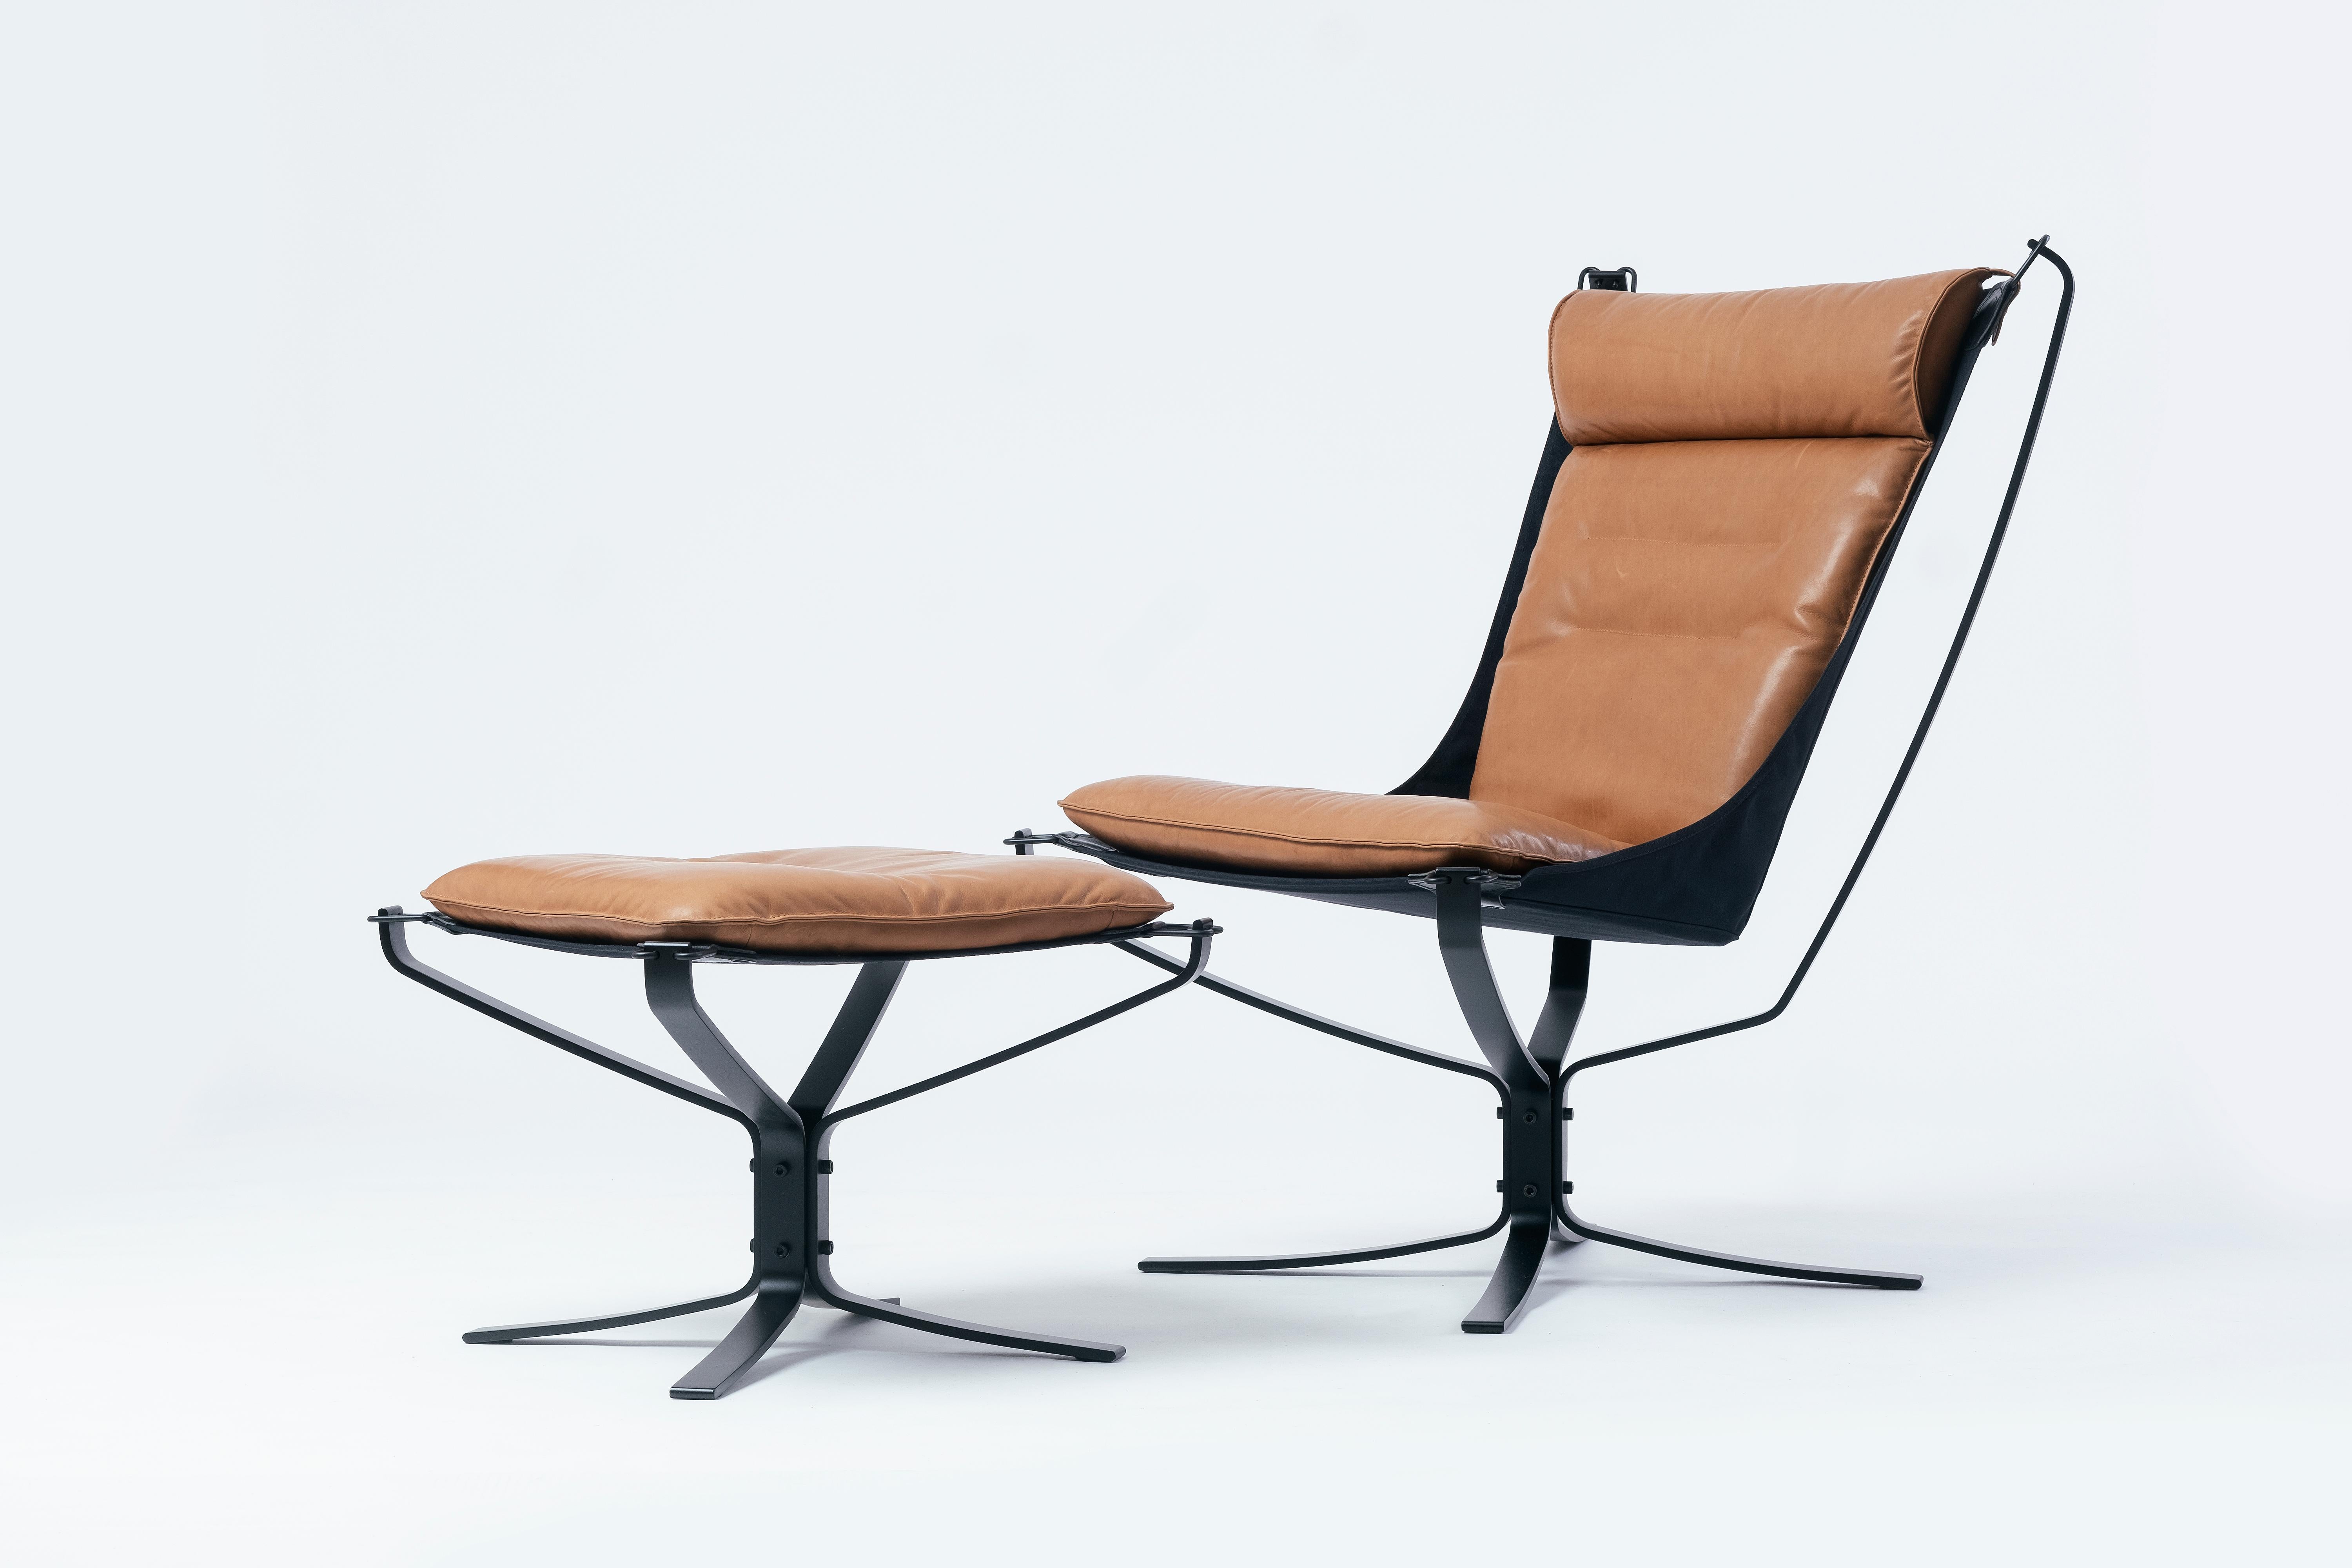 Mid-Century Modern falcon phoenix loungechair, hight back by Ingmar Relling. New edition. Elegant and timeless
The story started in 1971 when Sigurd Resell designed the chair, drawing great inspiration from the hammock. The chair’s hanging